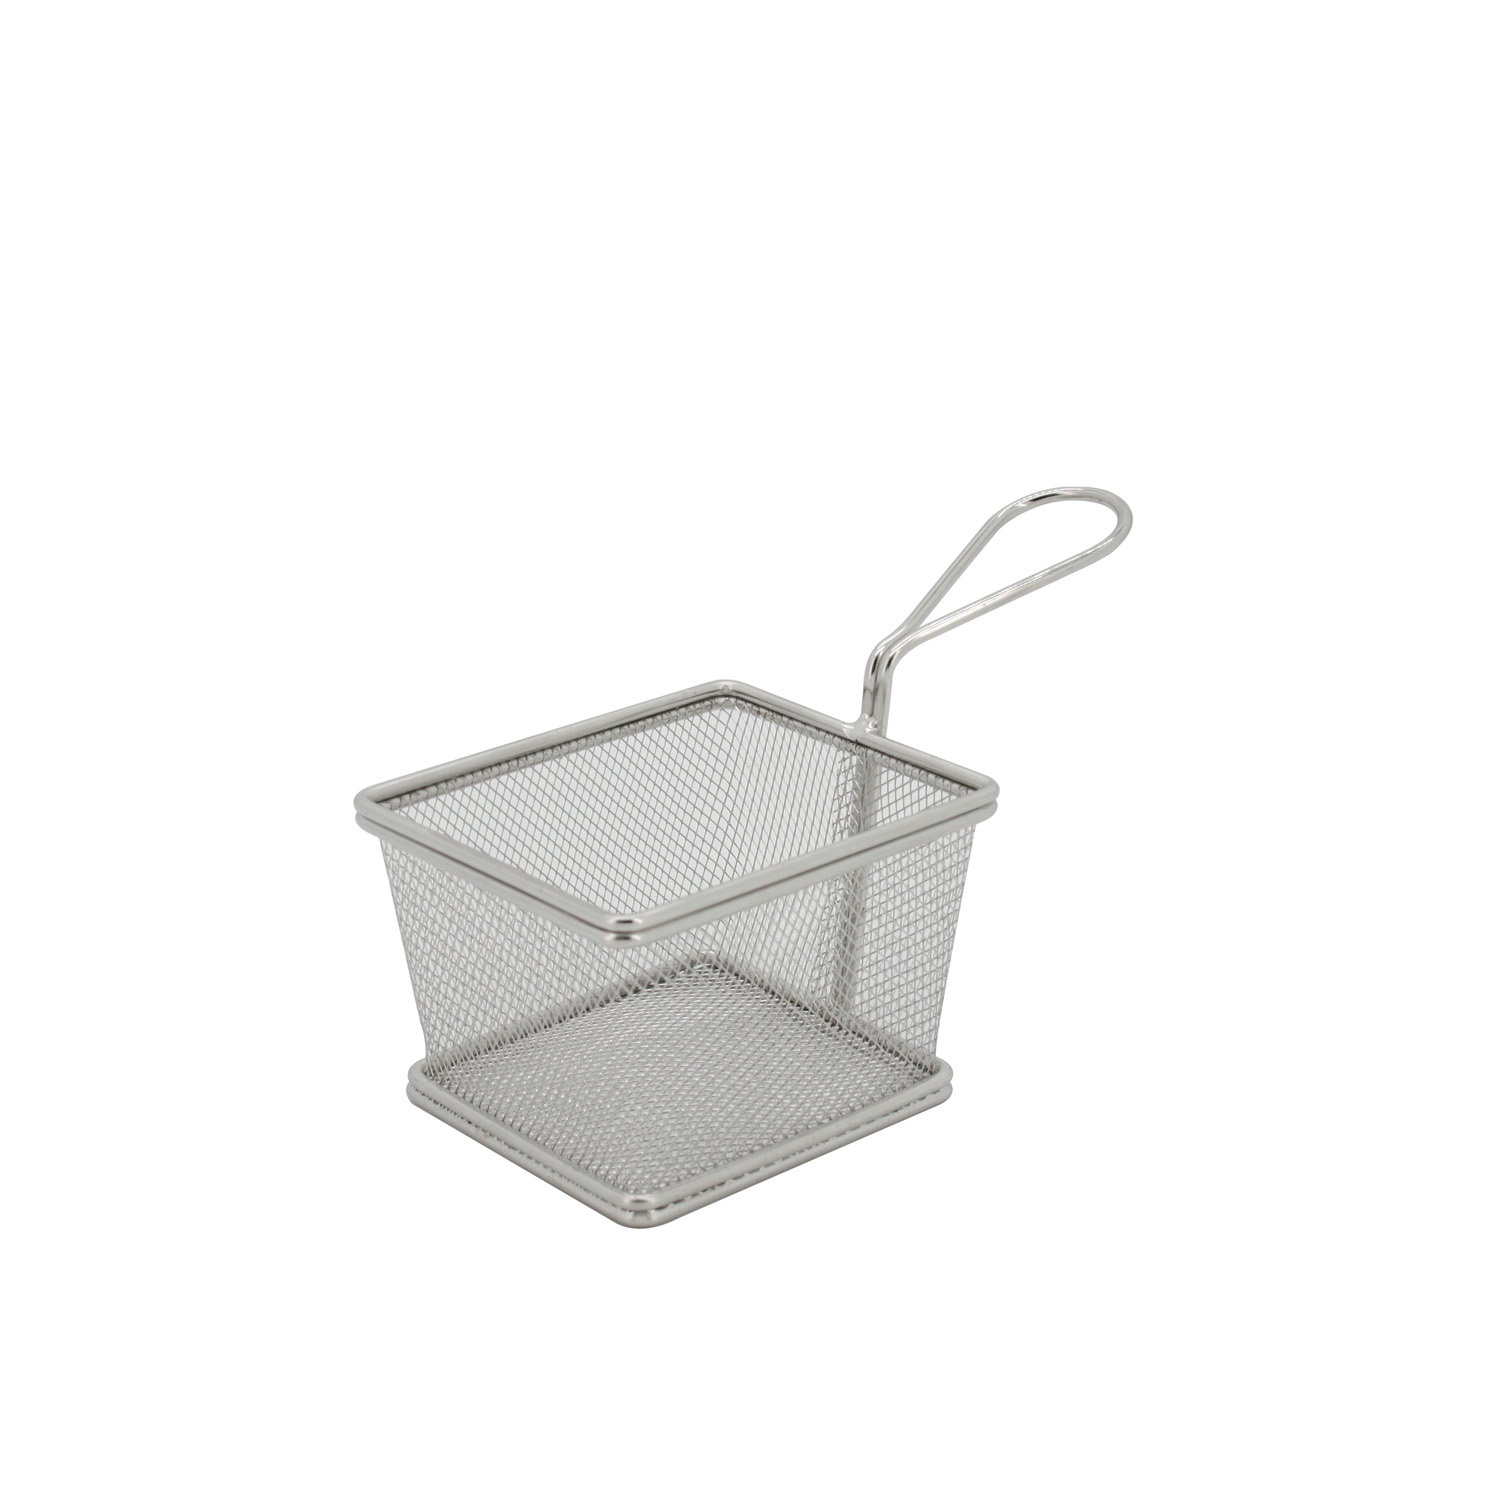 CAC China SMFB-2 Stainless Steel Square Mini Serving Fry Basket,, 5"L x 4-1/8"W x 3-1/4"H